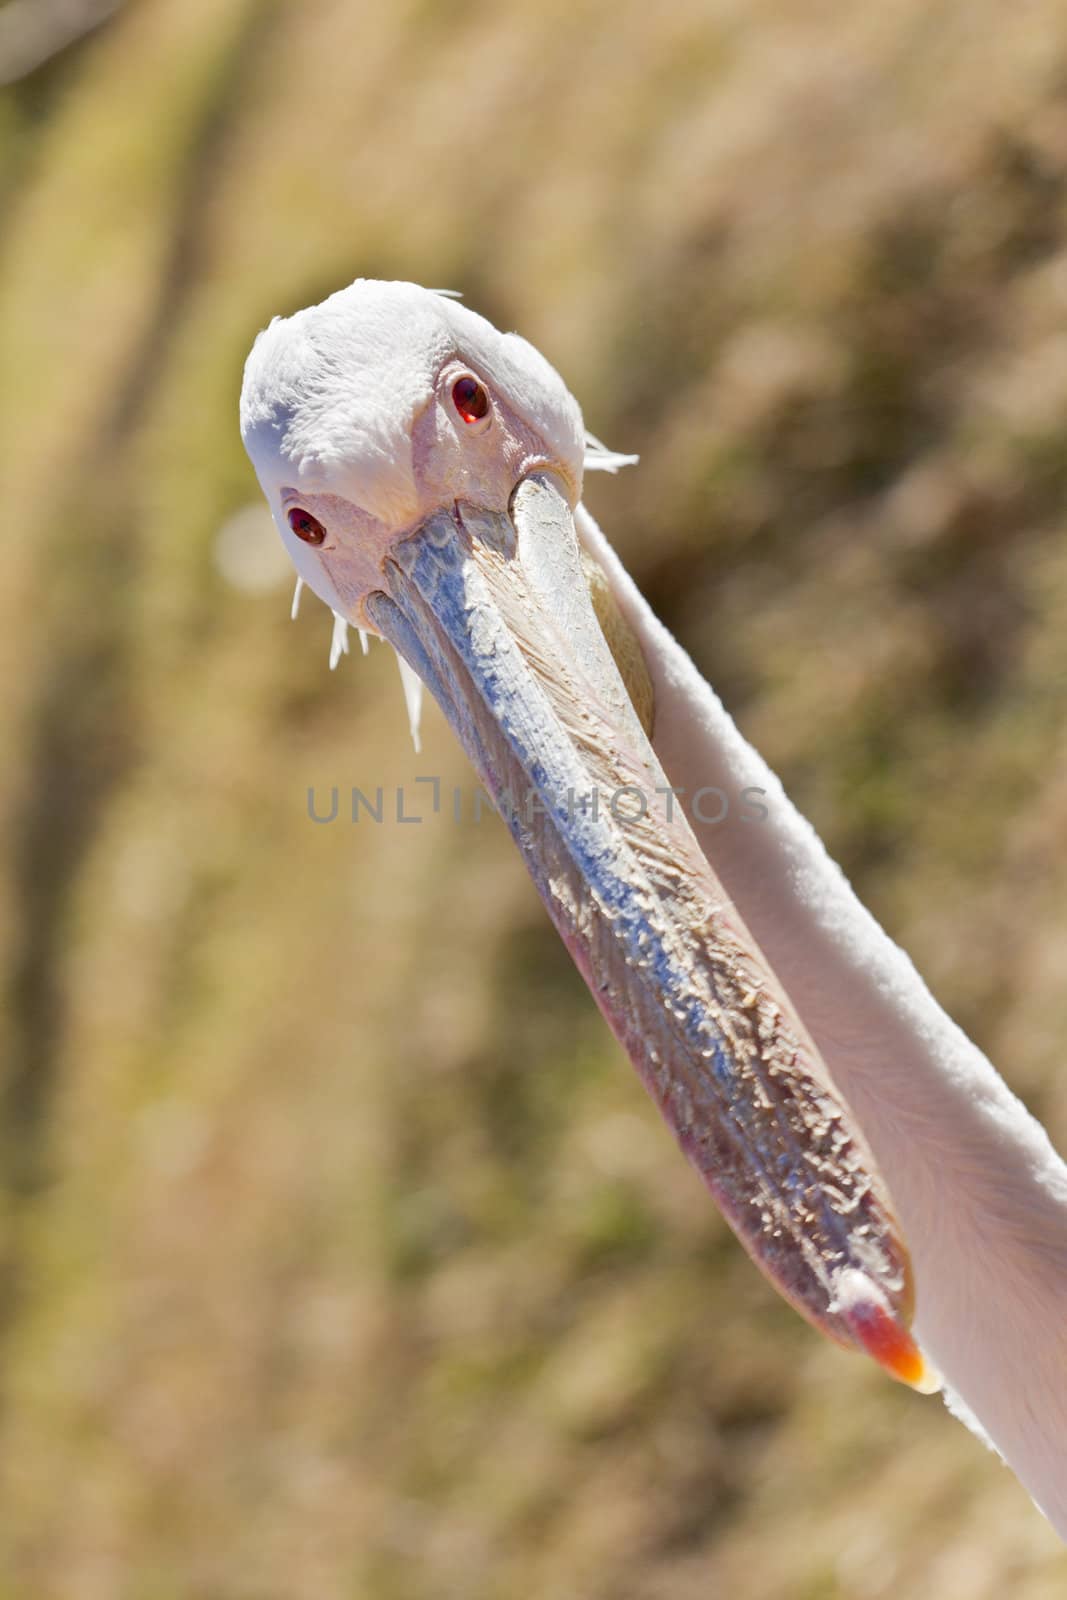 A white pelican with a long beak sticking its head up